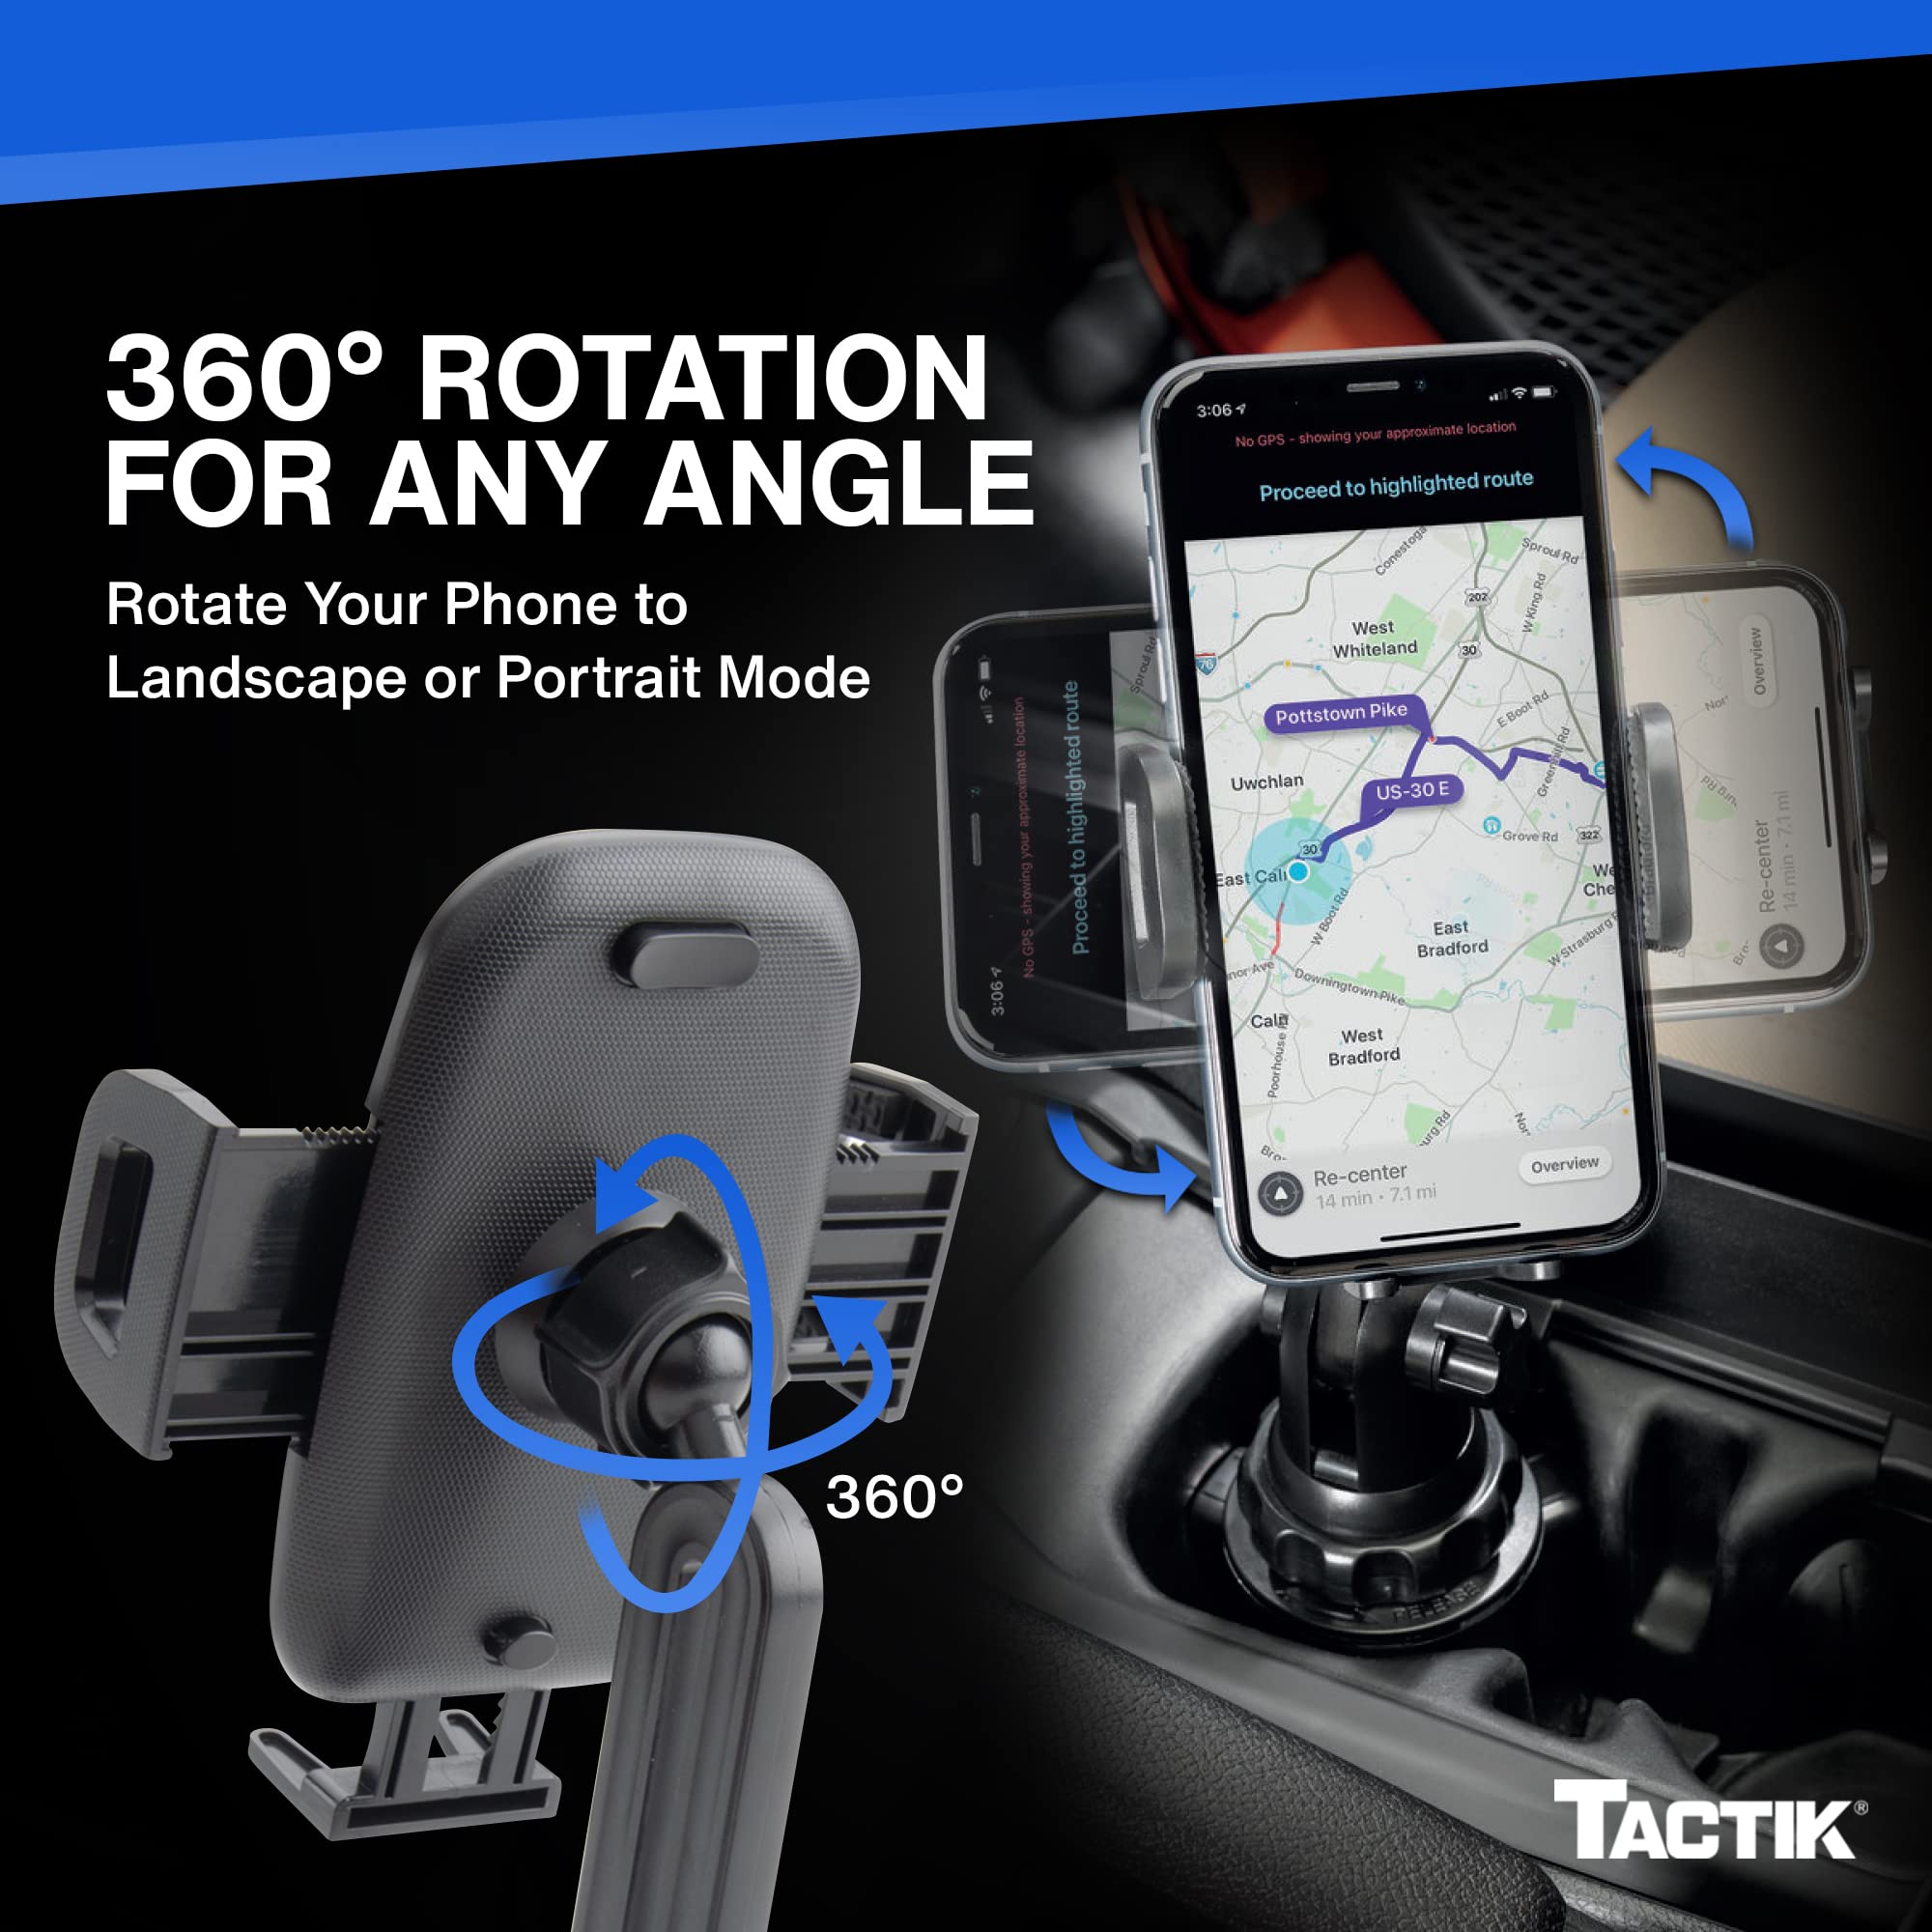 TACTIK Cup Holder Phone Mount Car Phone Holder Mount - Cell Phone Holder Car Adjustable 360° Rotation - Universal iPhone Holder for Car - Compatible with iPhone, Samsung Android, Google, Moto & More